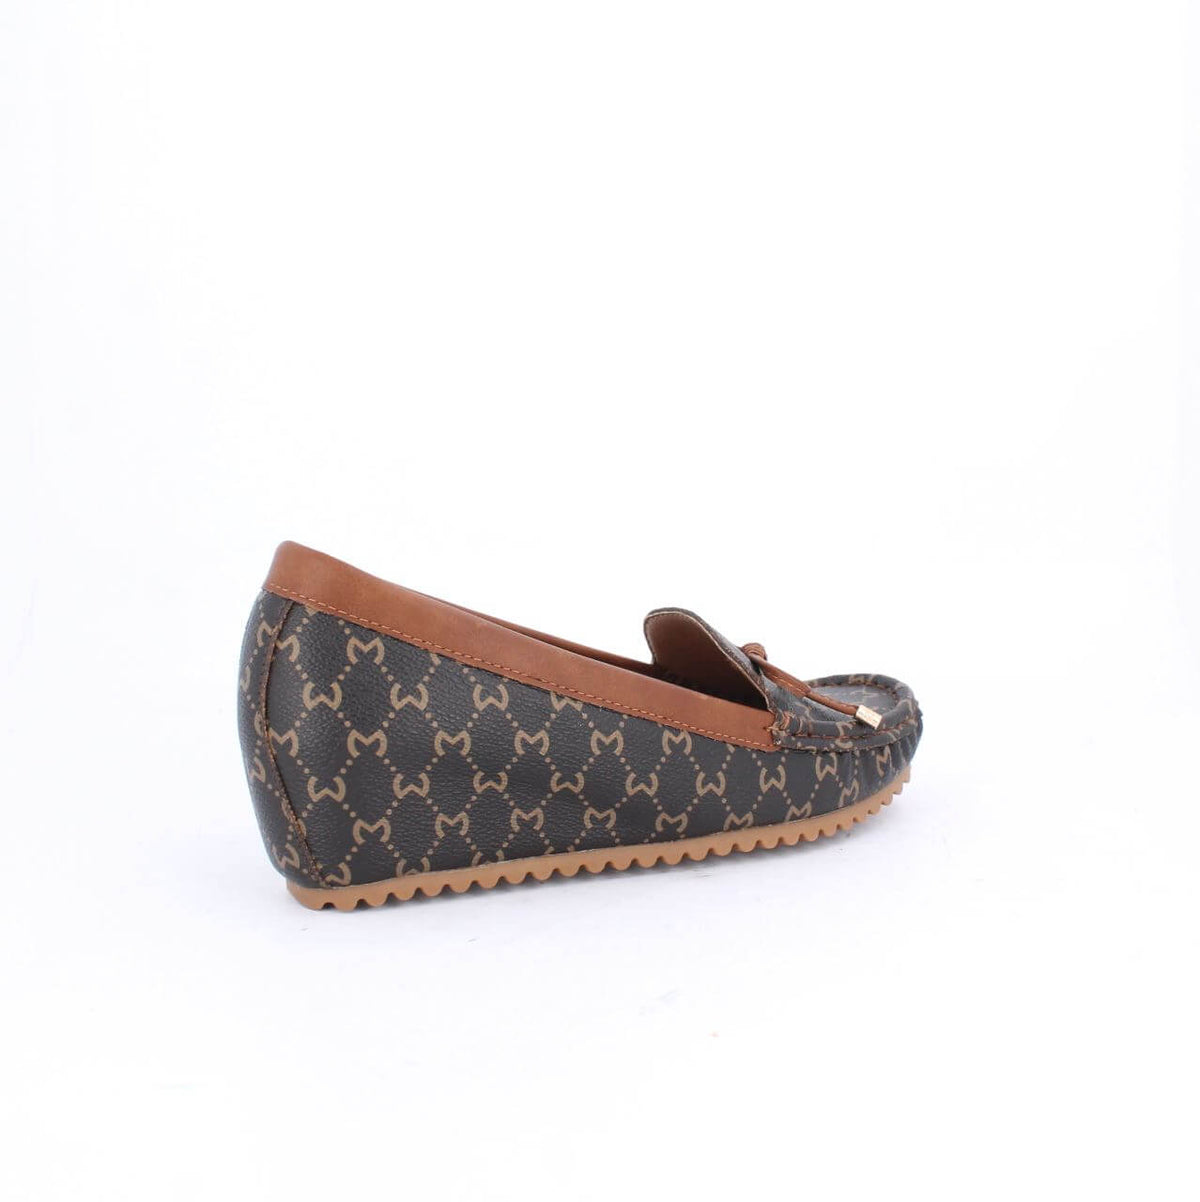 ANONAS MOCCASINS - BROWN